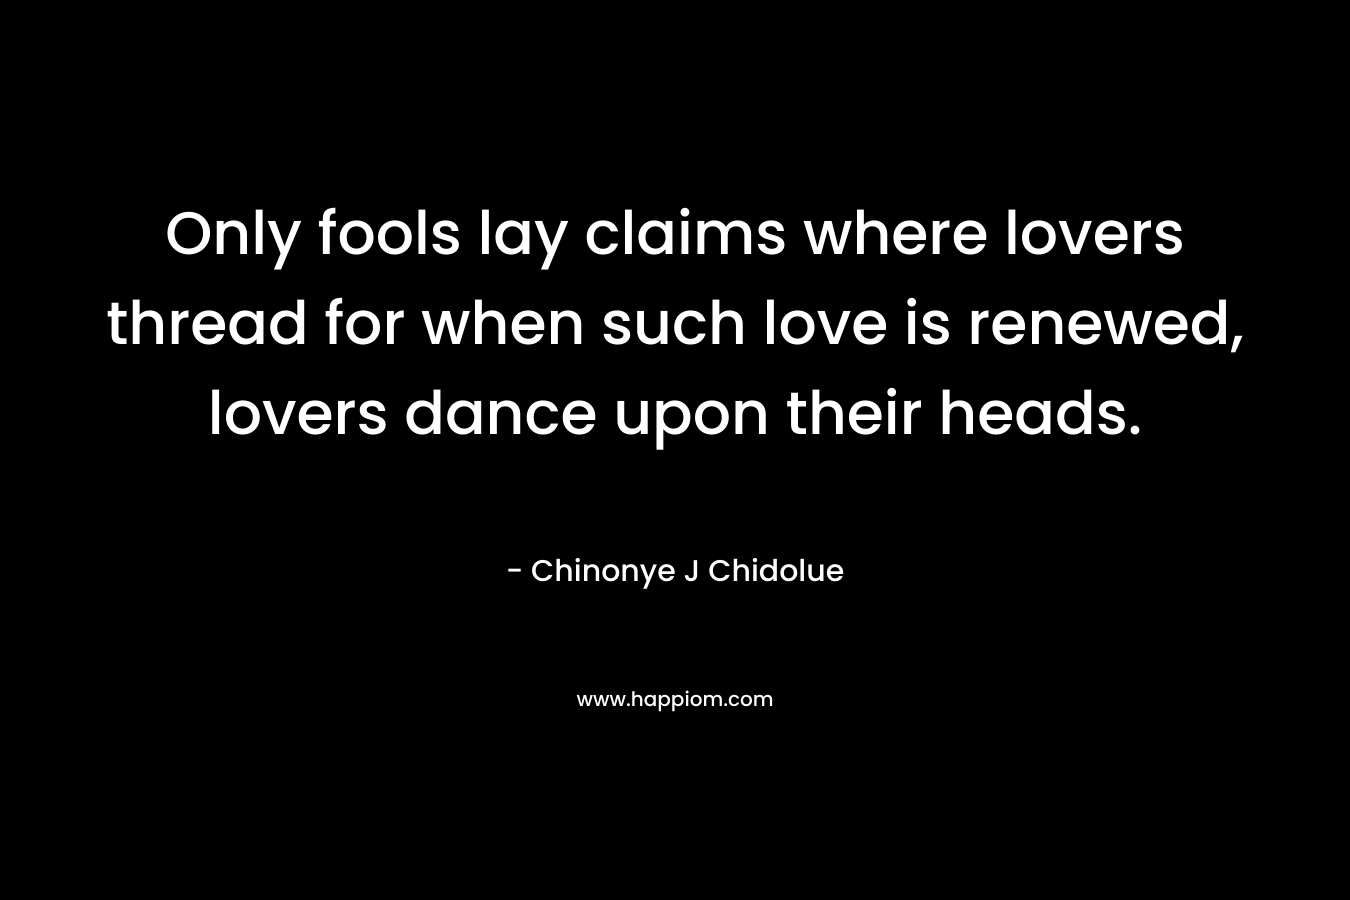 Only fools lay claims where lovers thread for when such love is renewed, lovers dance upon their heads.